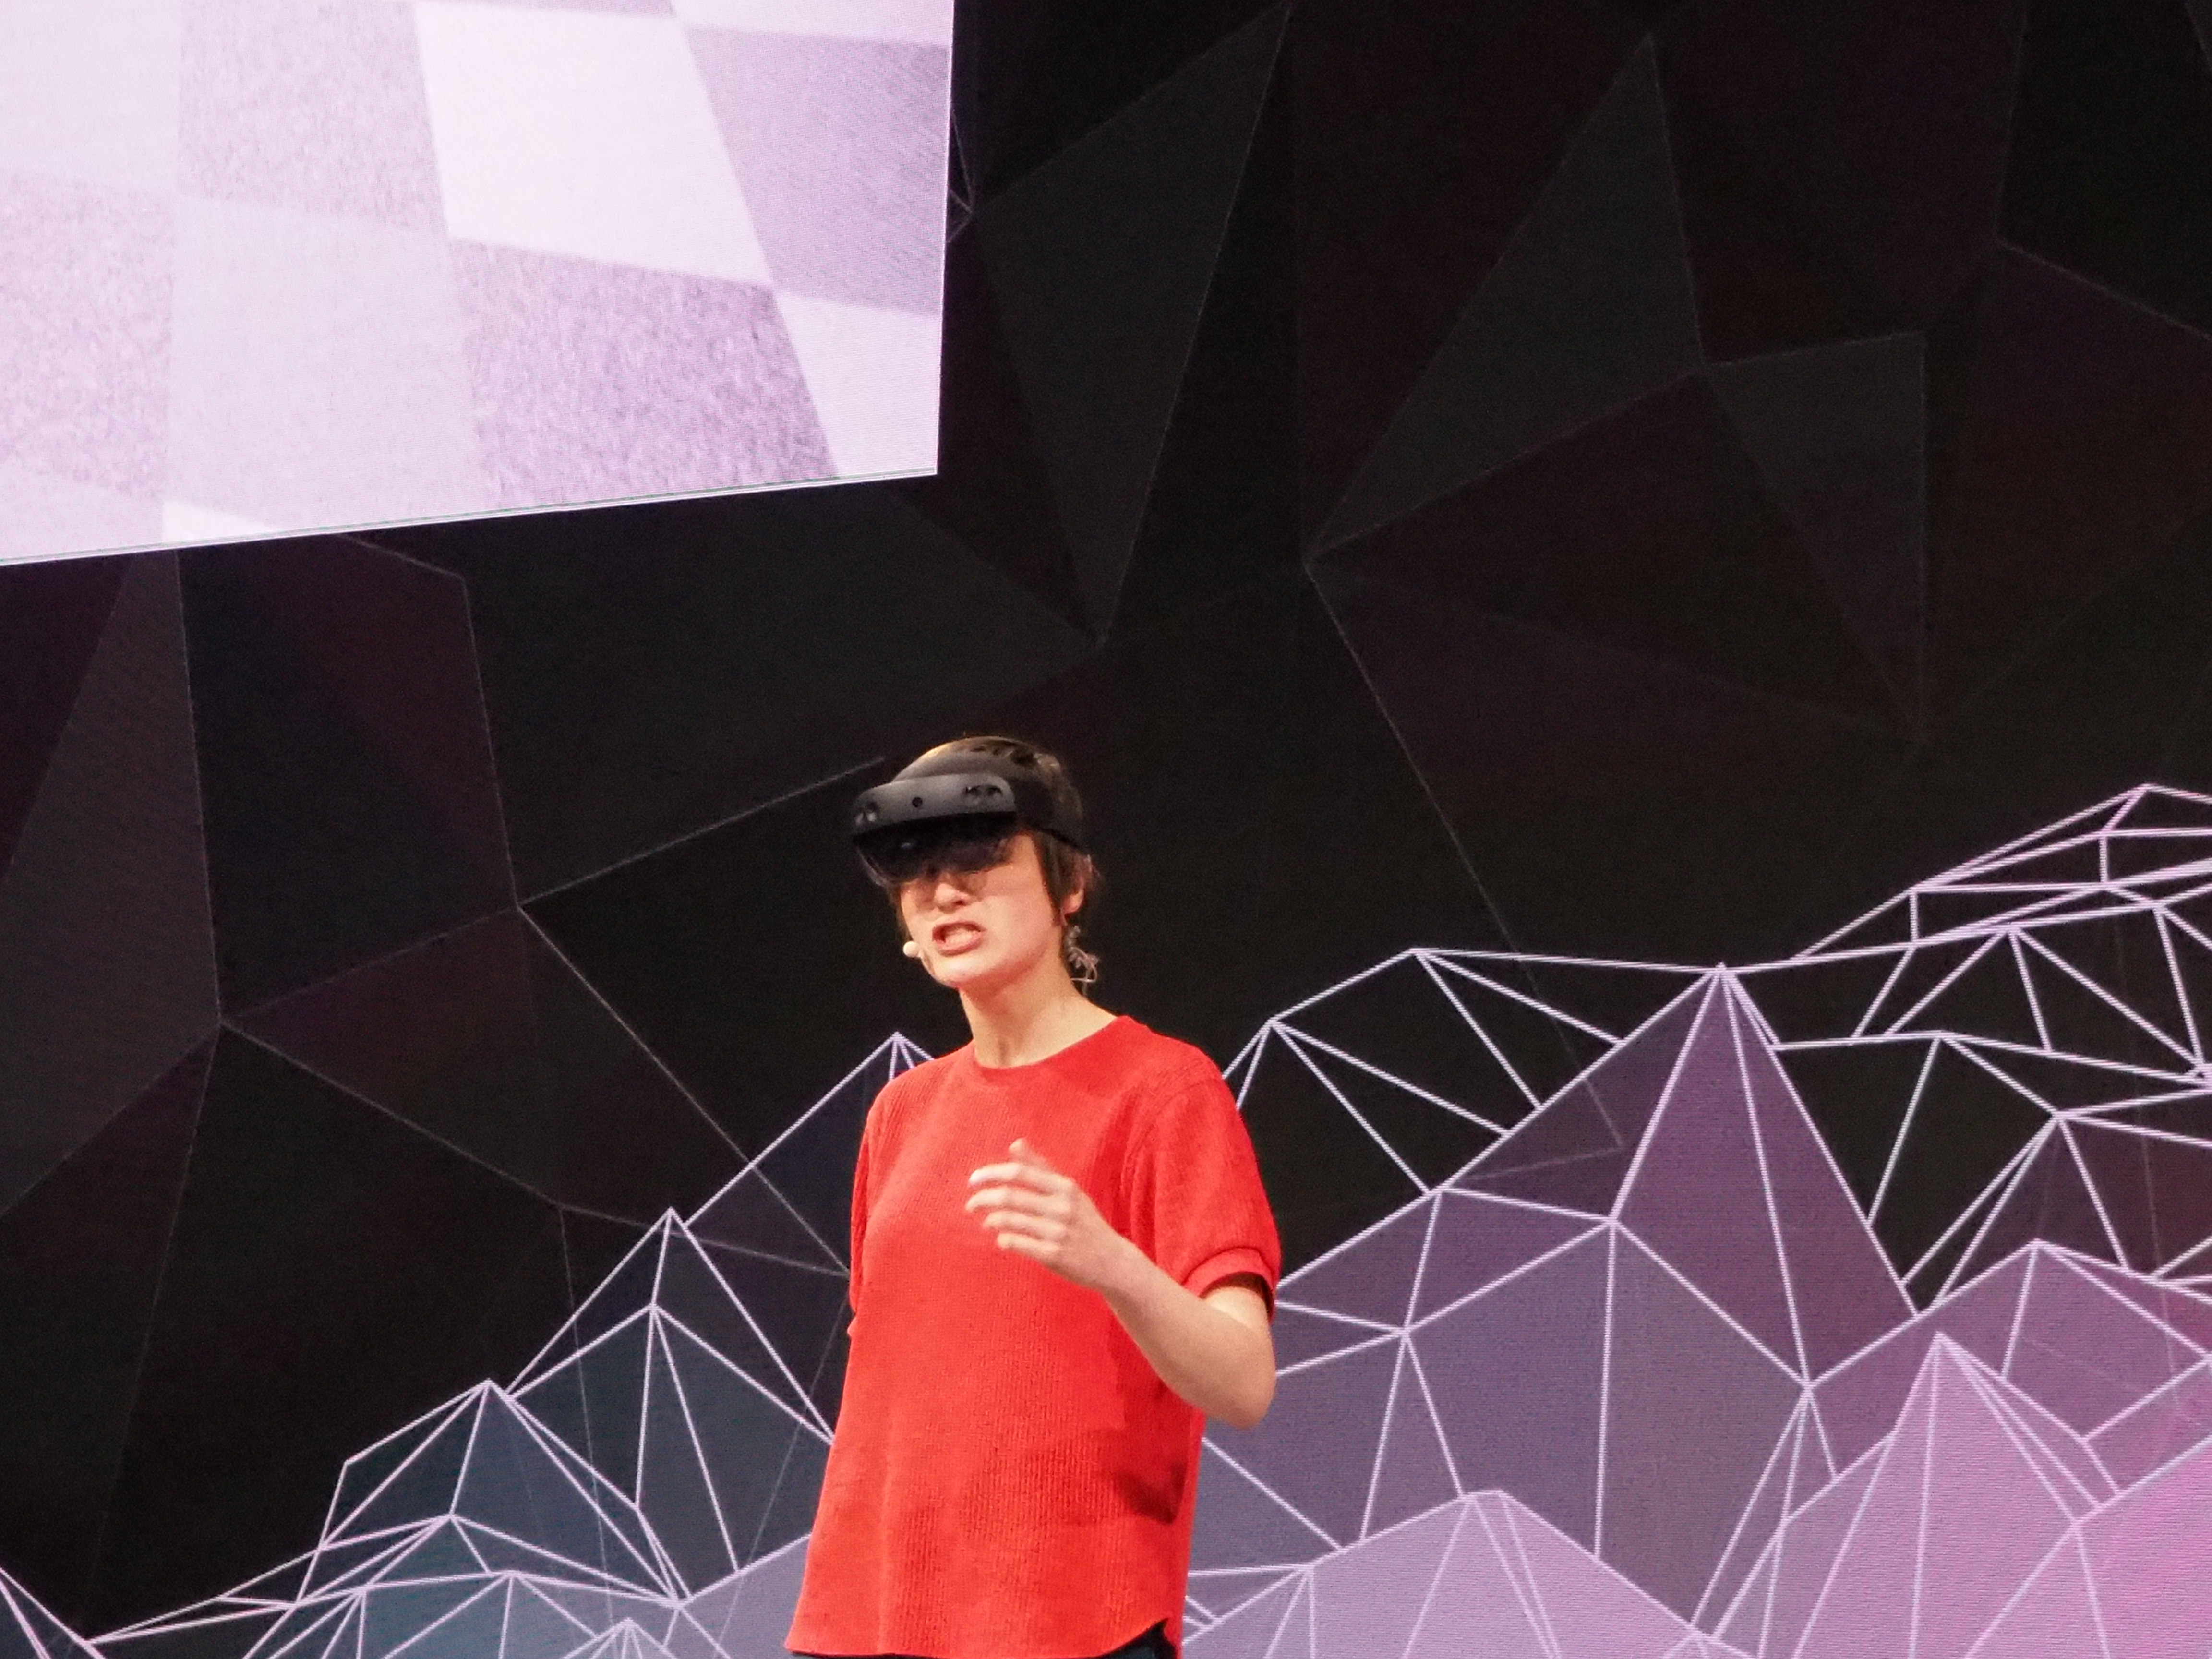 hololens 2 news roundup demo mwc 2019